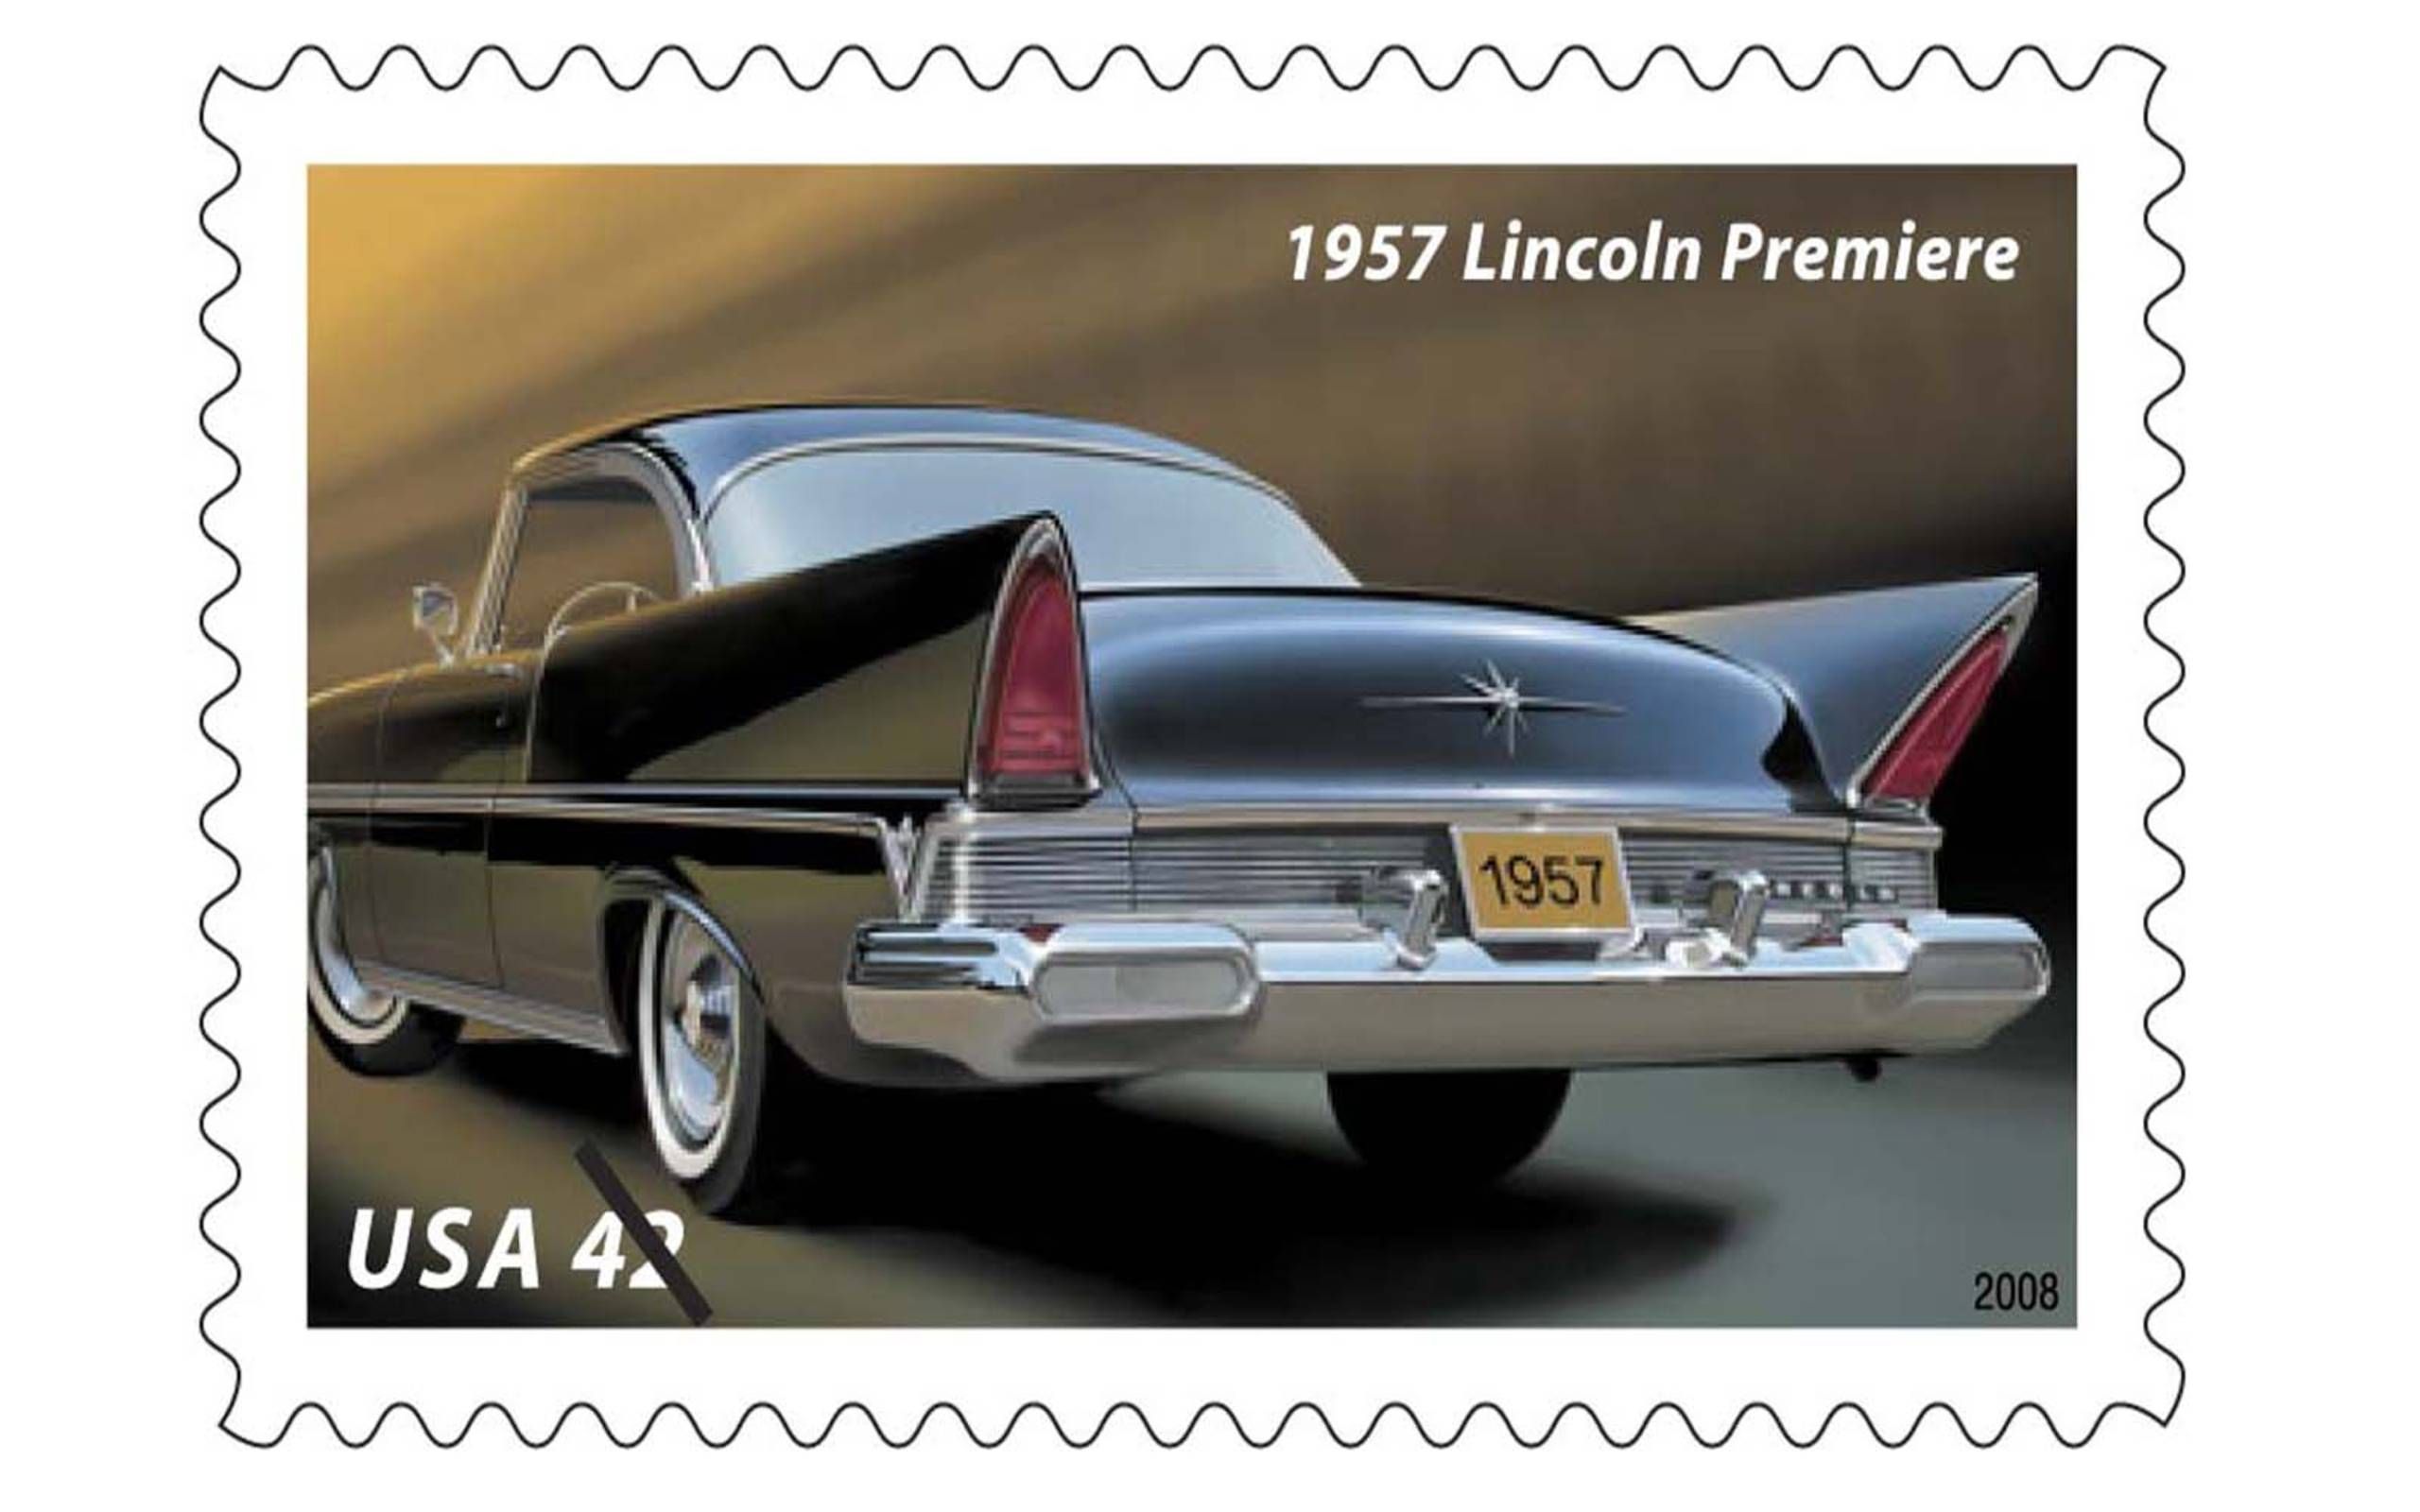 1957 CHEVY CADILLAC TAIL FINS & CHROME SET OF 6 STAMPS 1950s CLASSIC CARS 